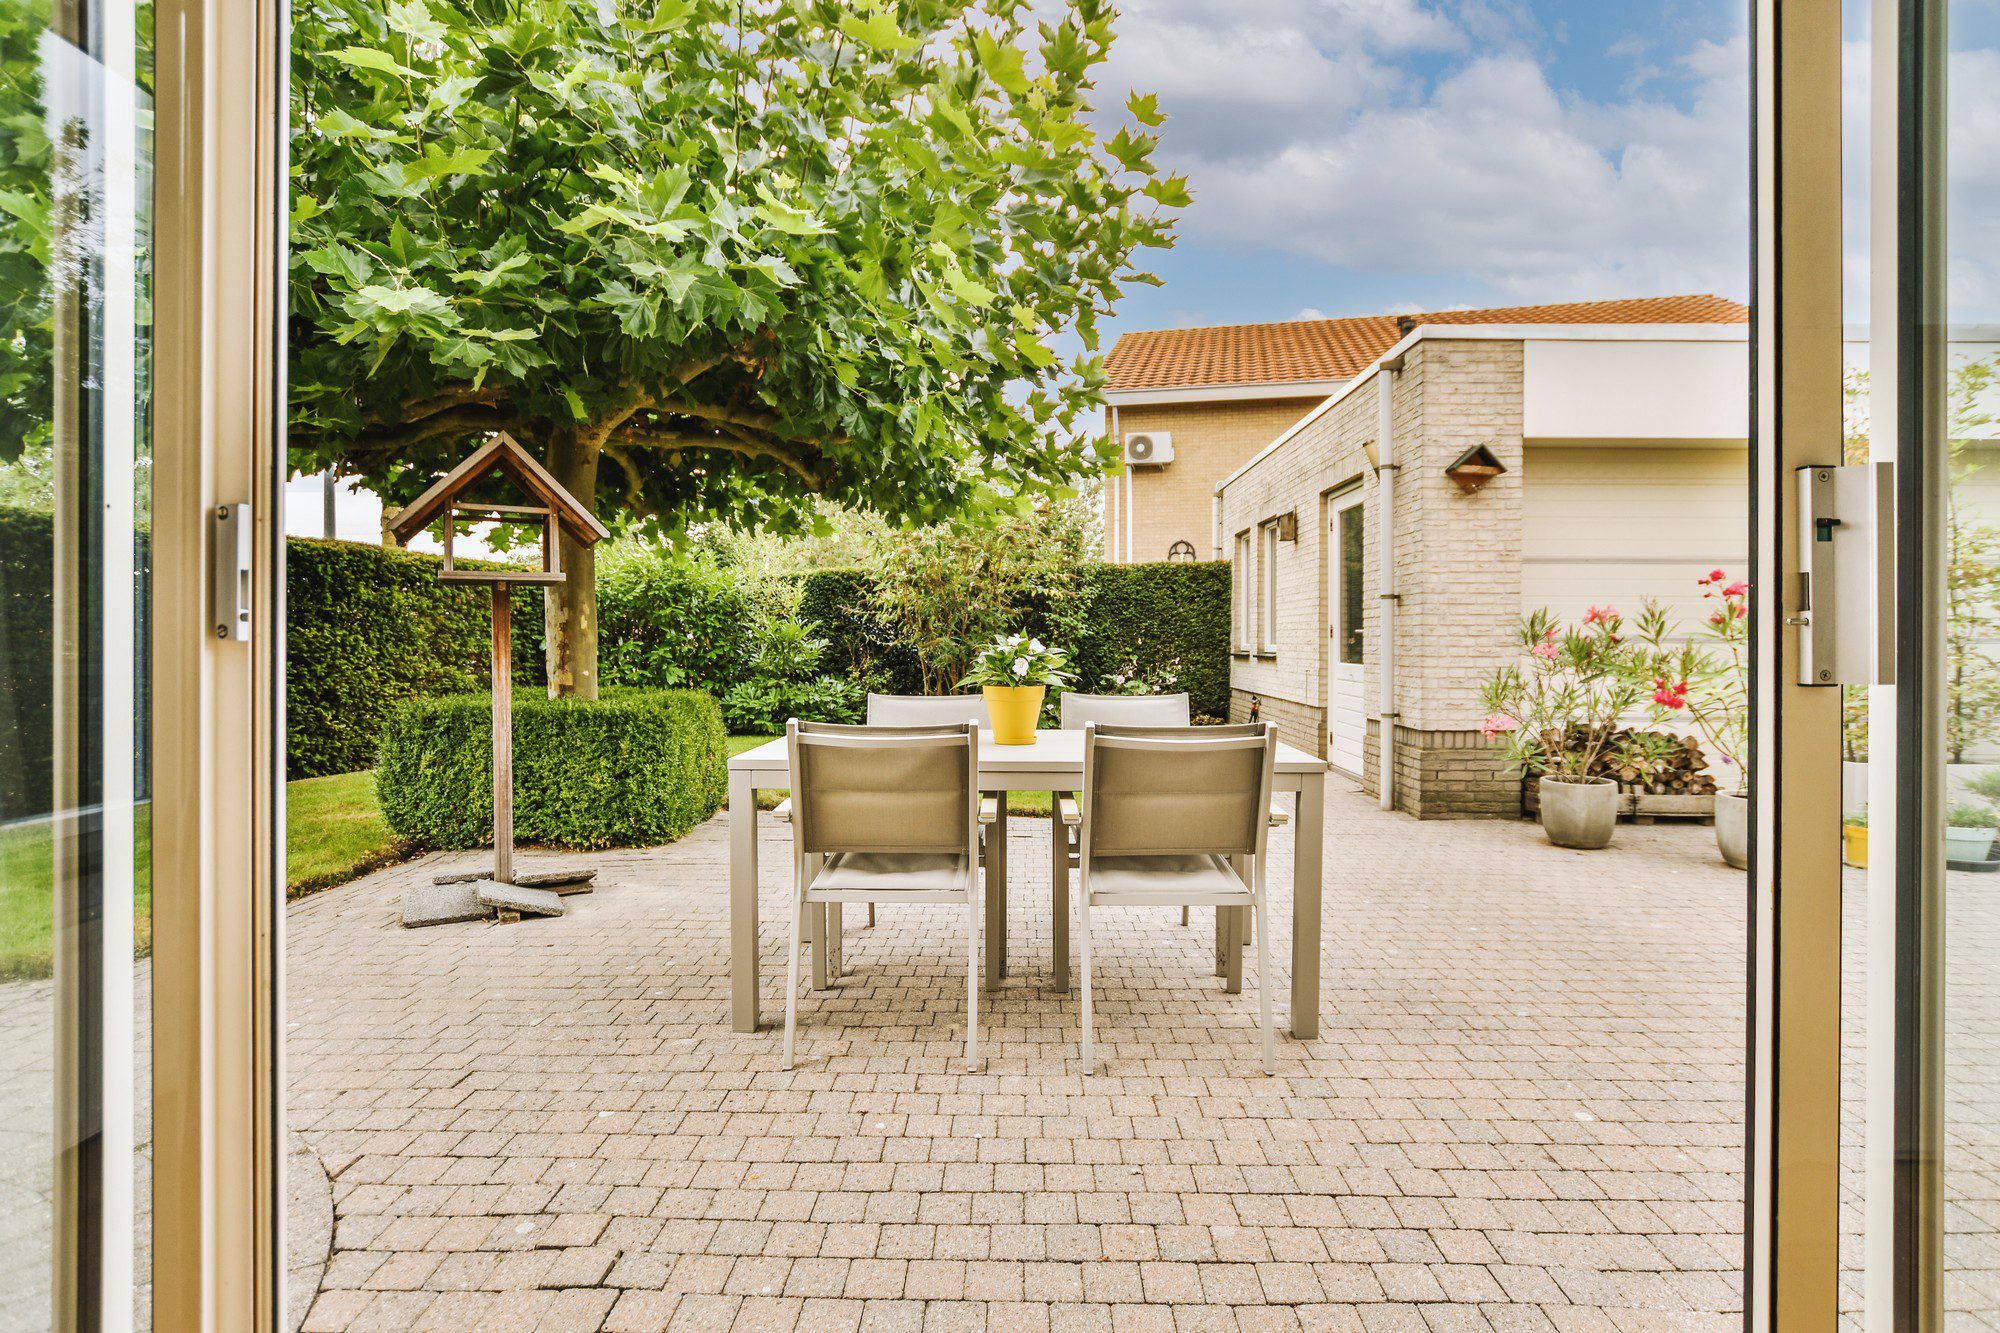 The image shows a neatly arranged outdoor dining area in a residential backyard. There is a patio dining set consisting of a table and four chairs with metal frames and light-coloured seating cushions. On the table sits a potted plant in a yellow pot, adding a touch of colour to the setting.The ground is paved with bricks, and the area is surrounded by a well-maintained hedge providing privacy. There is a large deciduous tree providing shade, under which the dining set is placed. To the left of the tree stands a wooden birdhouse on a stand.The backyard is part of a house with light-coloured brick walls, and you can see a window and a sliding glass door, through which the photo seems to have been taken. There are also some flowering plants in containers, adding more greenery and colour to the scene. Overall, this setting conveys a serene and inviting outdoor space for dining and relaxing.